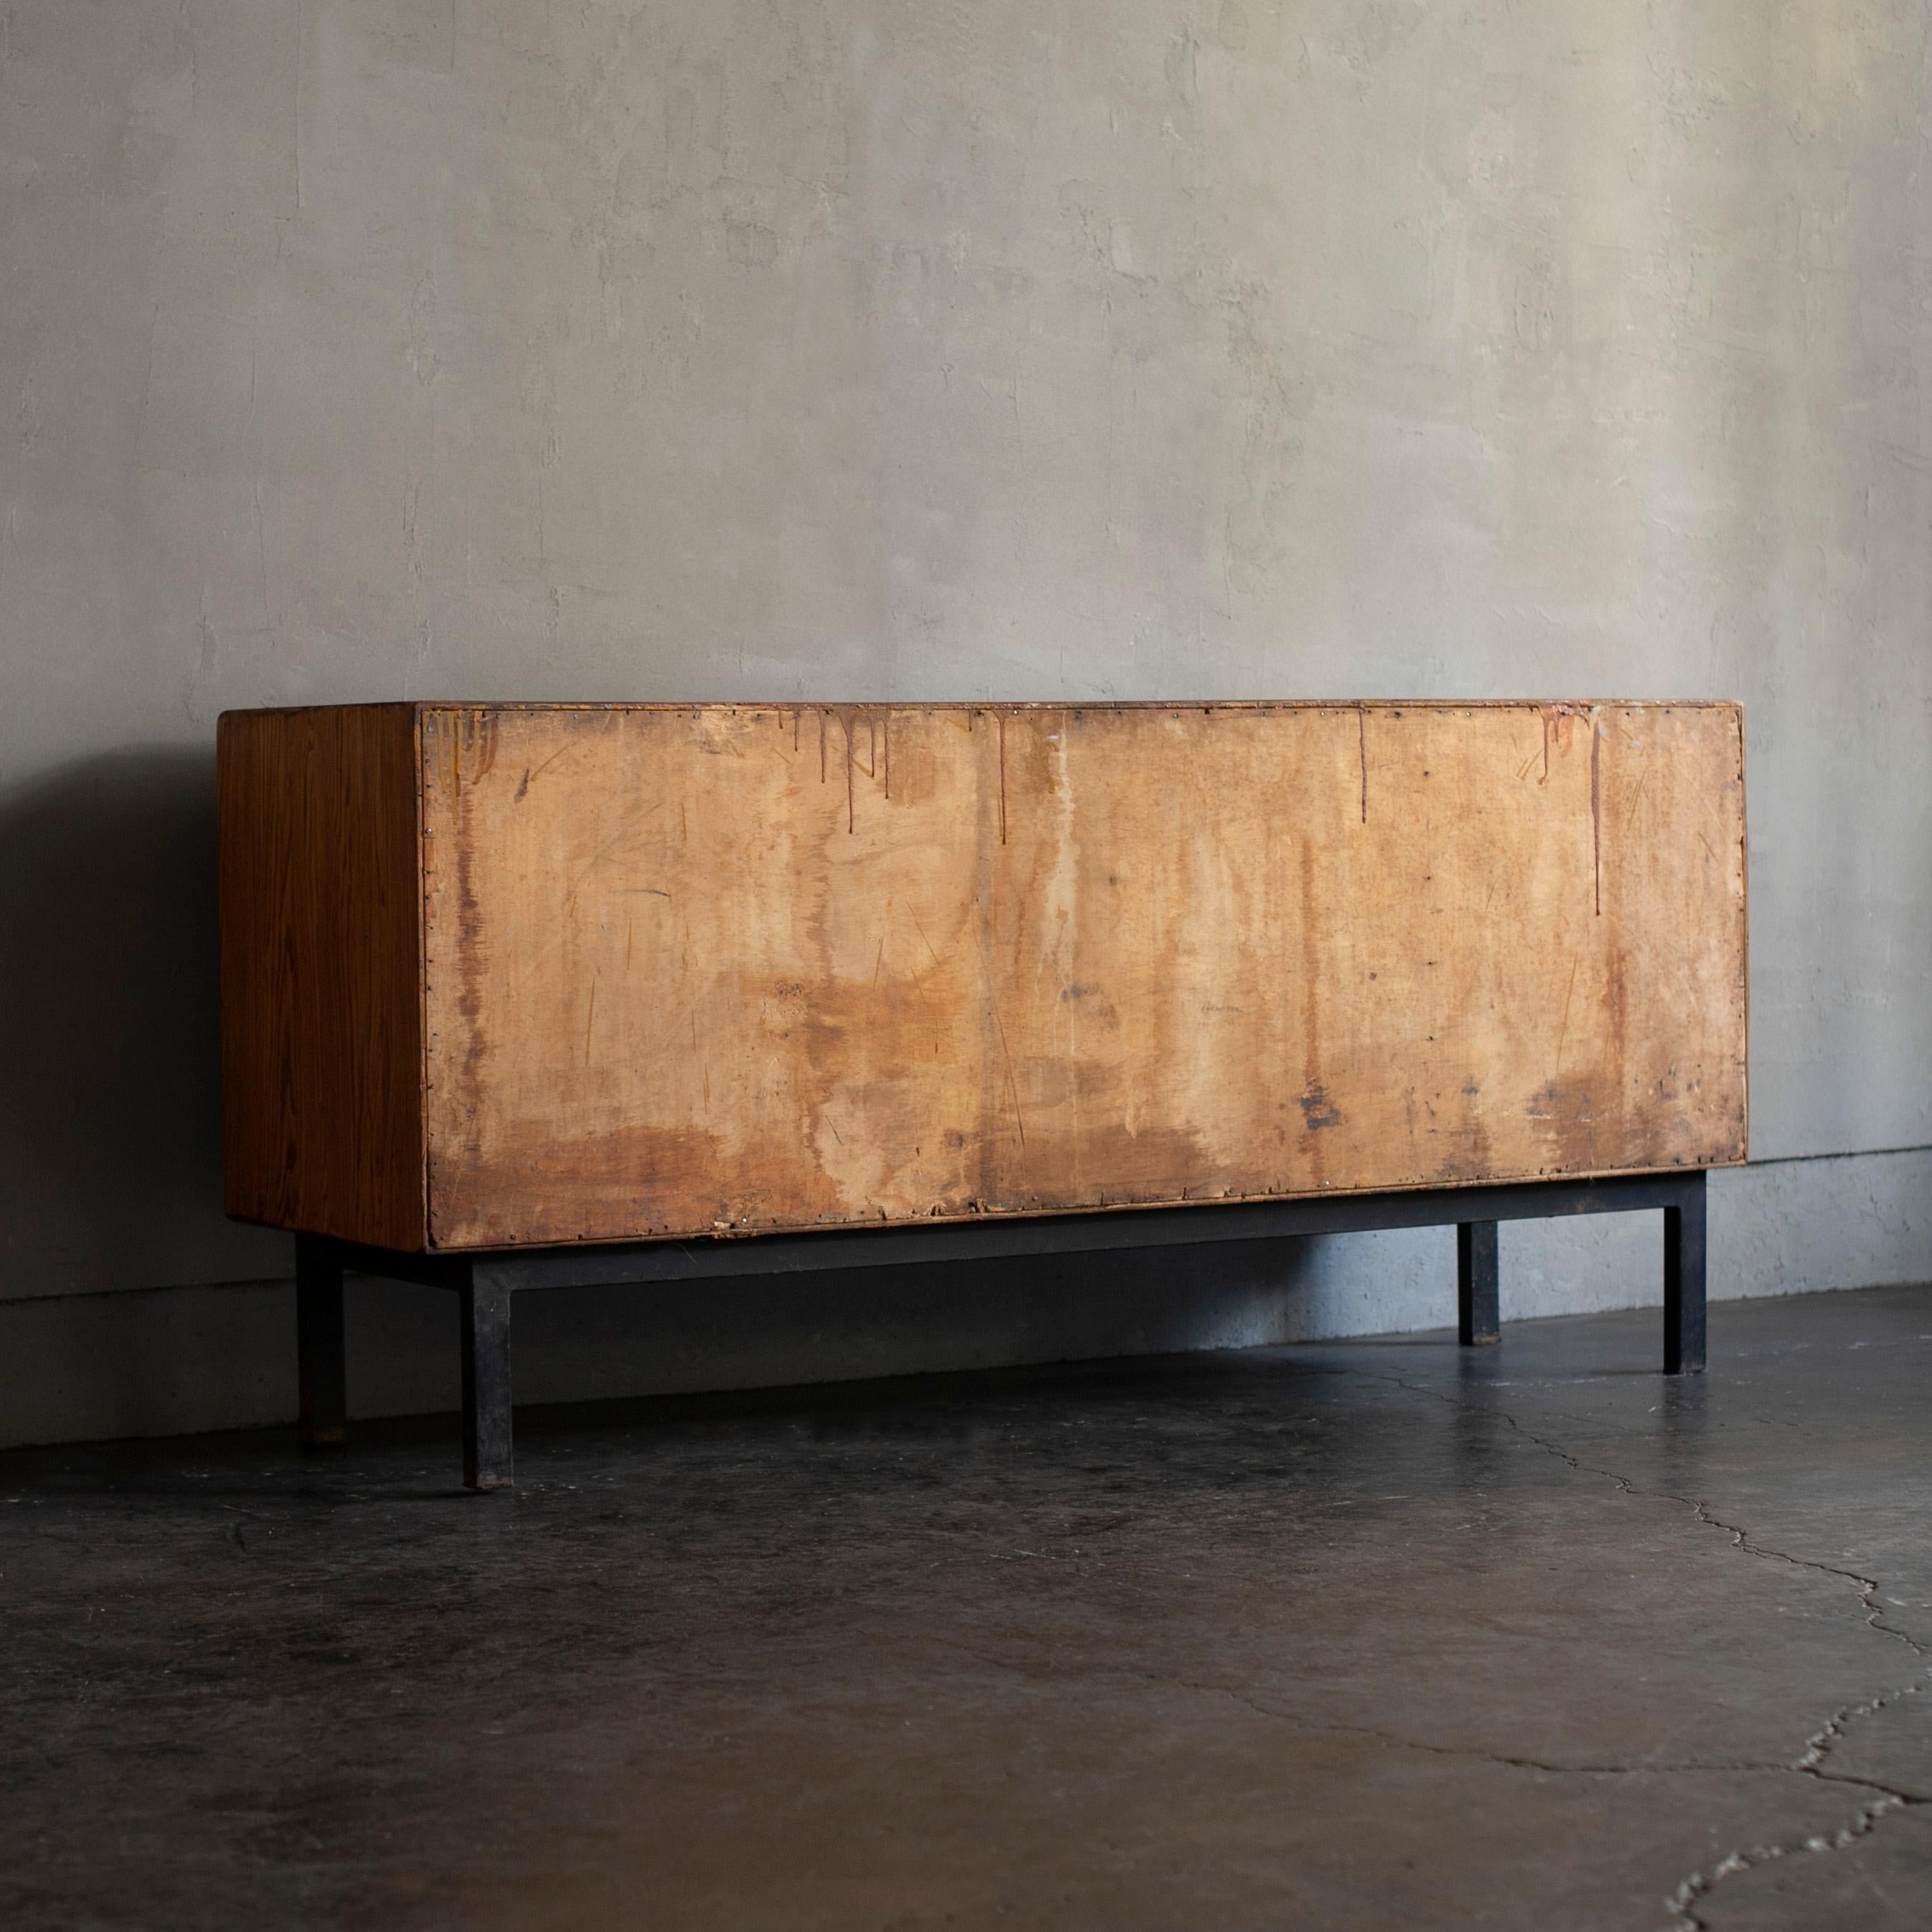 Mauritanian Charlotte Perriand Sideboard from Cite Cansado, Mauritania